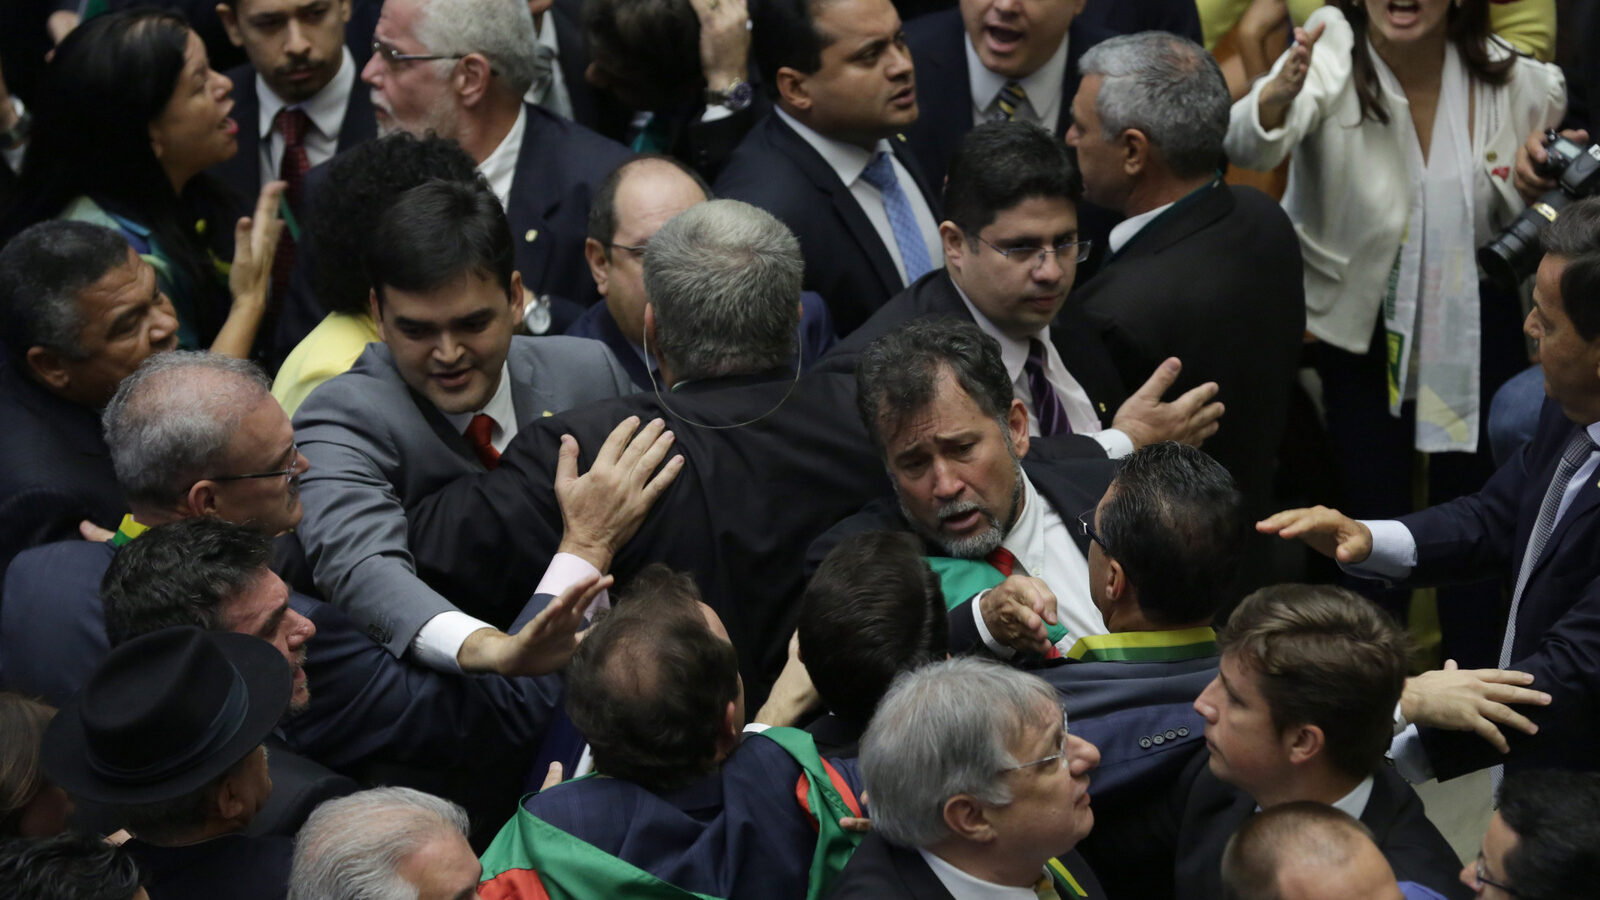 Pro-government lawmakers scuffle with opposition lawmakers during the session on whether or not to impeachment Brazil's President Dilma Rousseff in Brasilia, Brazil, Sunday, April 17, 2016. The vote will determine whether the impeachment proceeds to the Senate. Rousseff is accused of violating Brazil's fiscal laws to shore up public support amid a flagging economy. (AP Photo/Eraldo Peres)